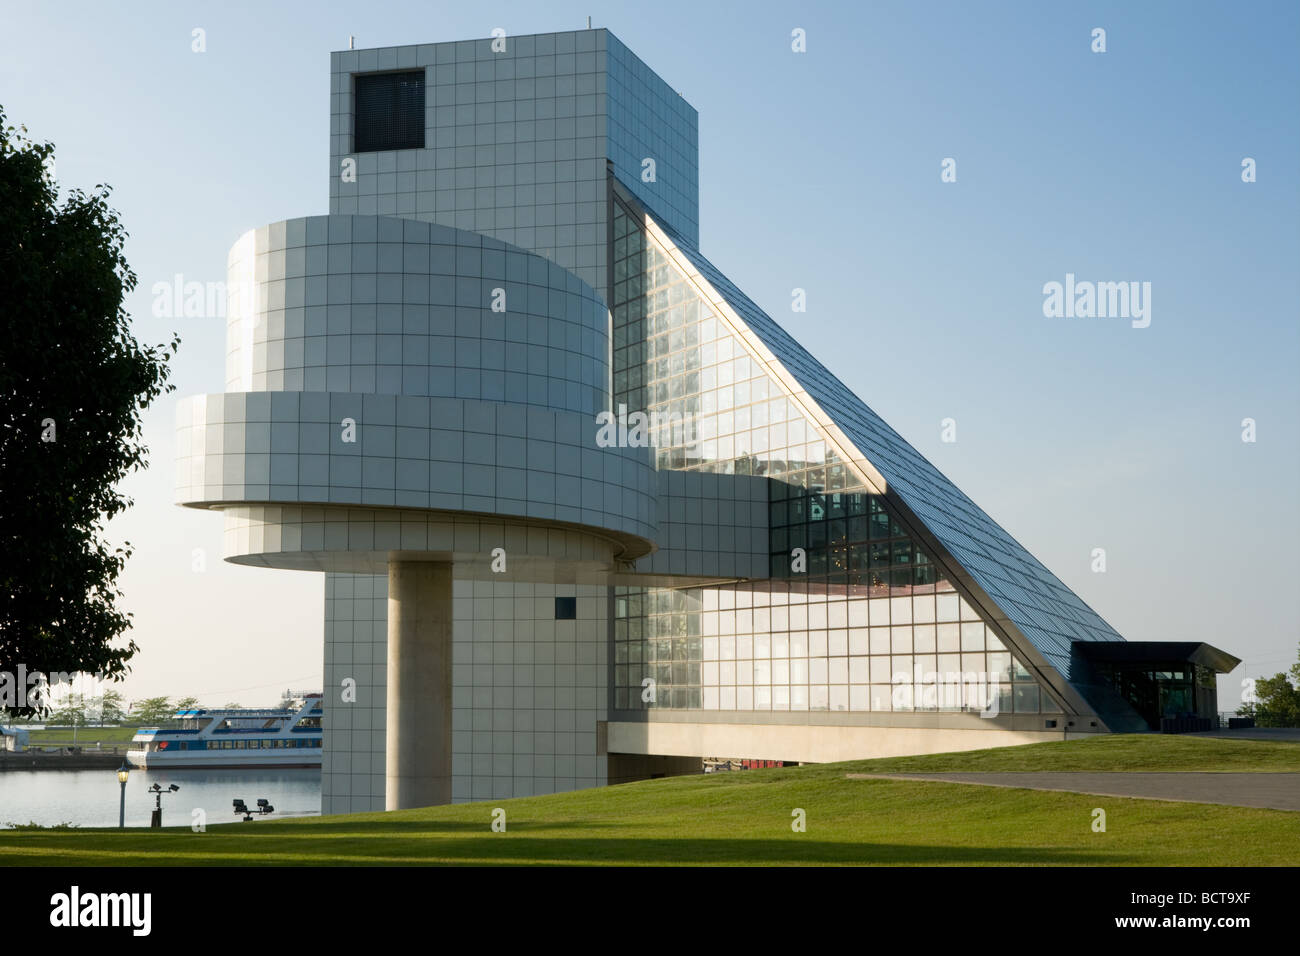 Rock and Roll Hall Of Fame von I M Pei in Cleveland Ohio Stockfoto